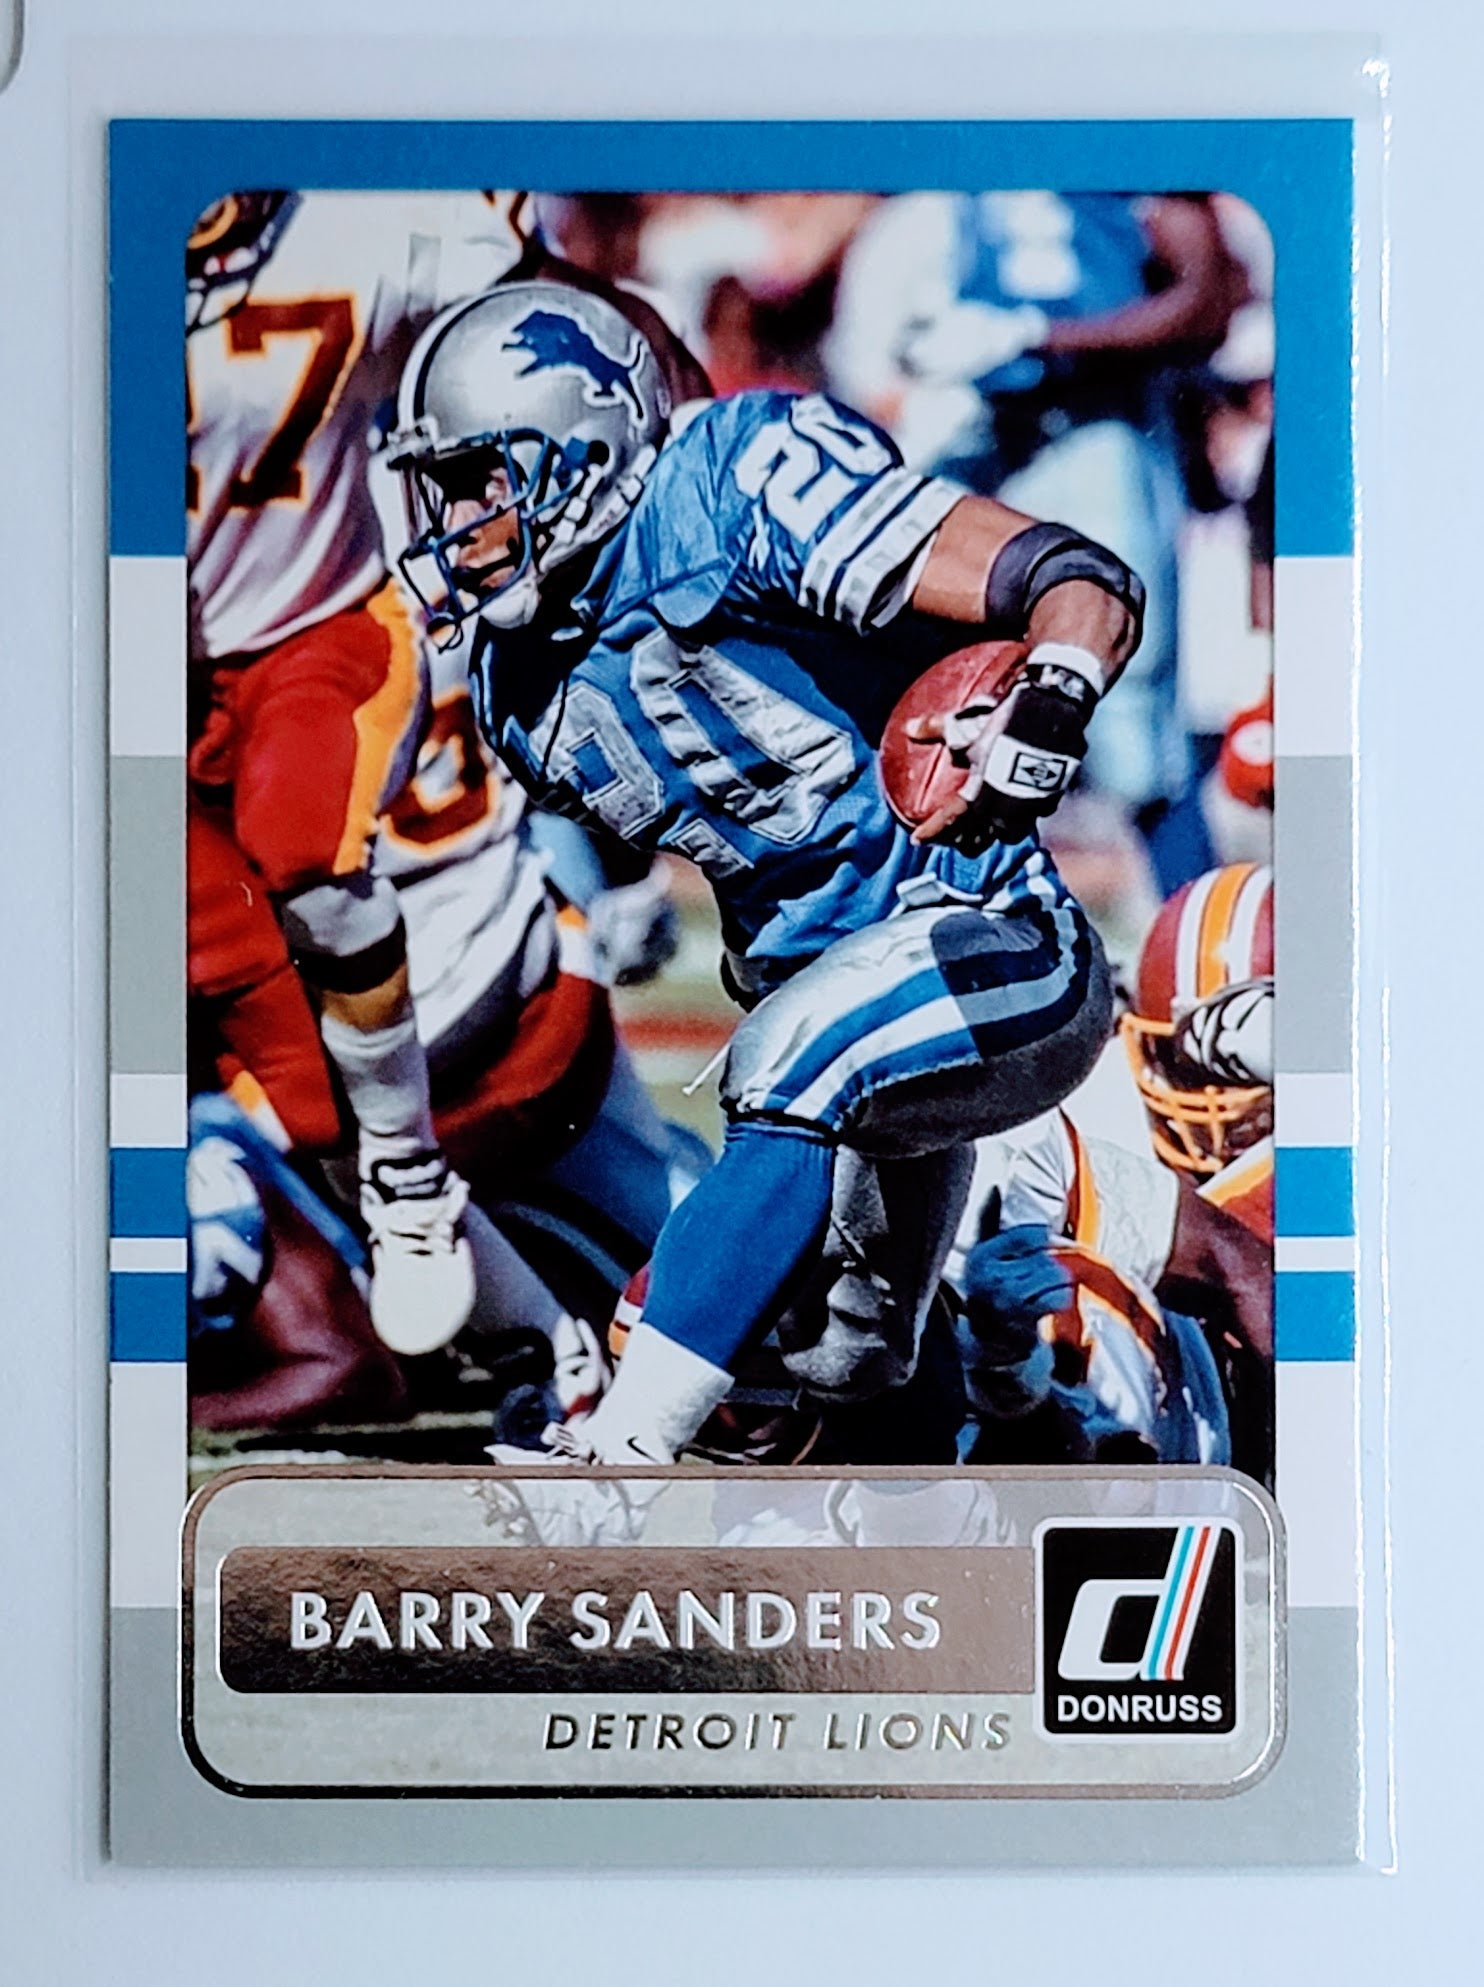 2015 Donruss Barry
  Sanders   Detroit Lions Football
  Card  TH1CB simple Xclusive Collectibles   